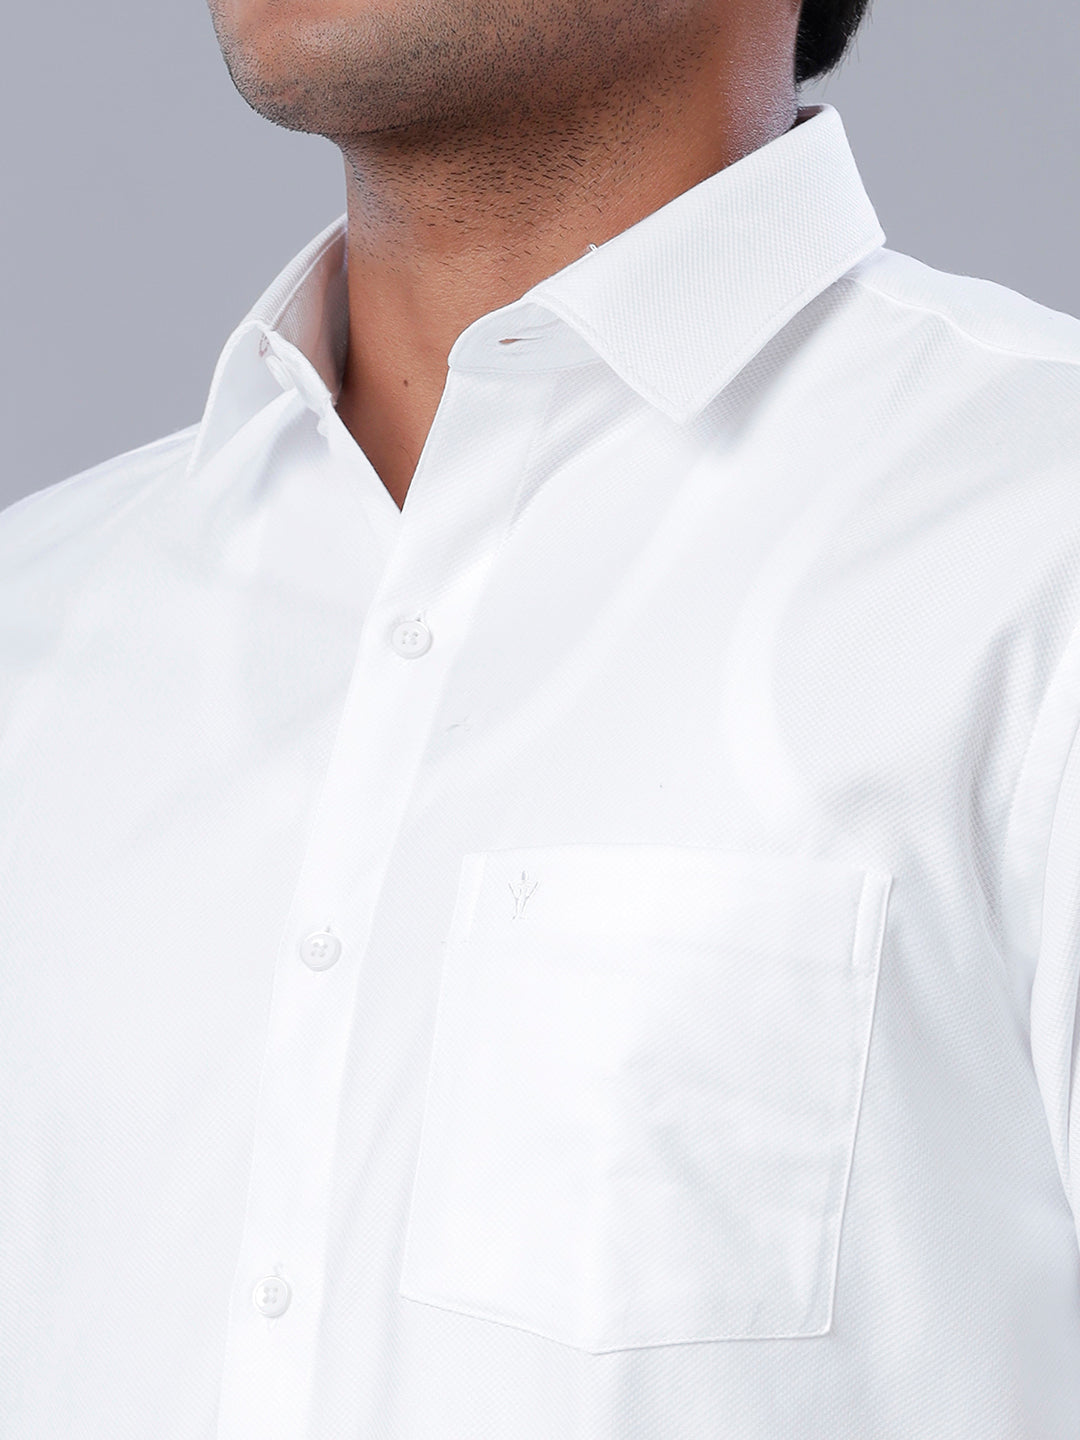 Mens Premium Pure Cotton White Shirt Half Sleeves Limited Edition 1-Zoom view